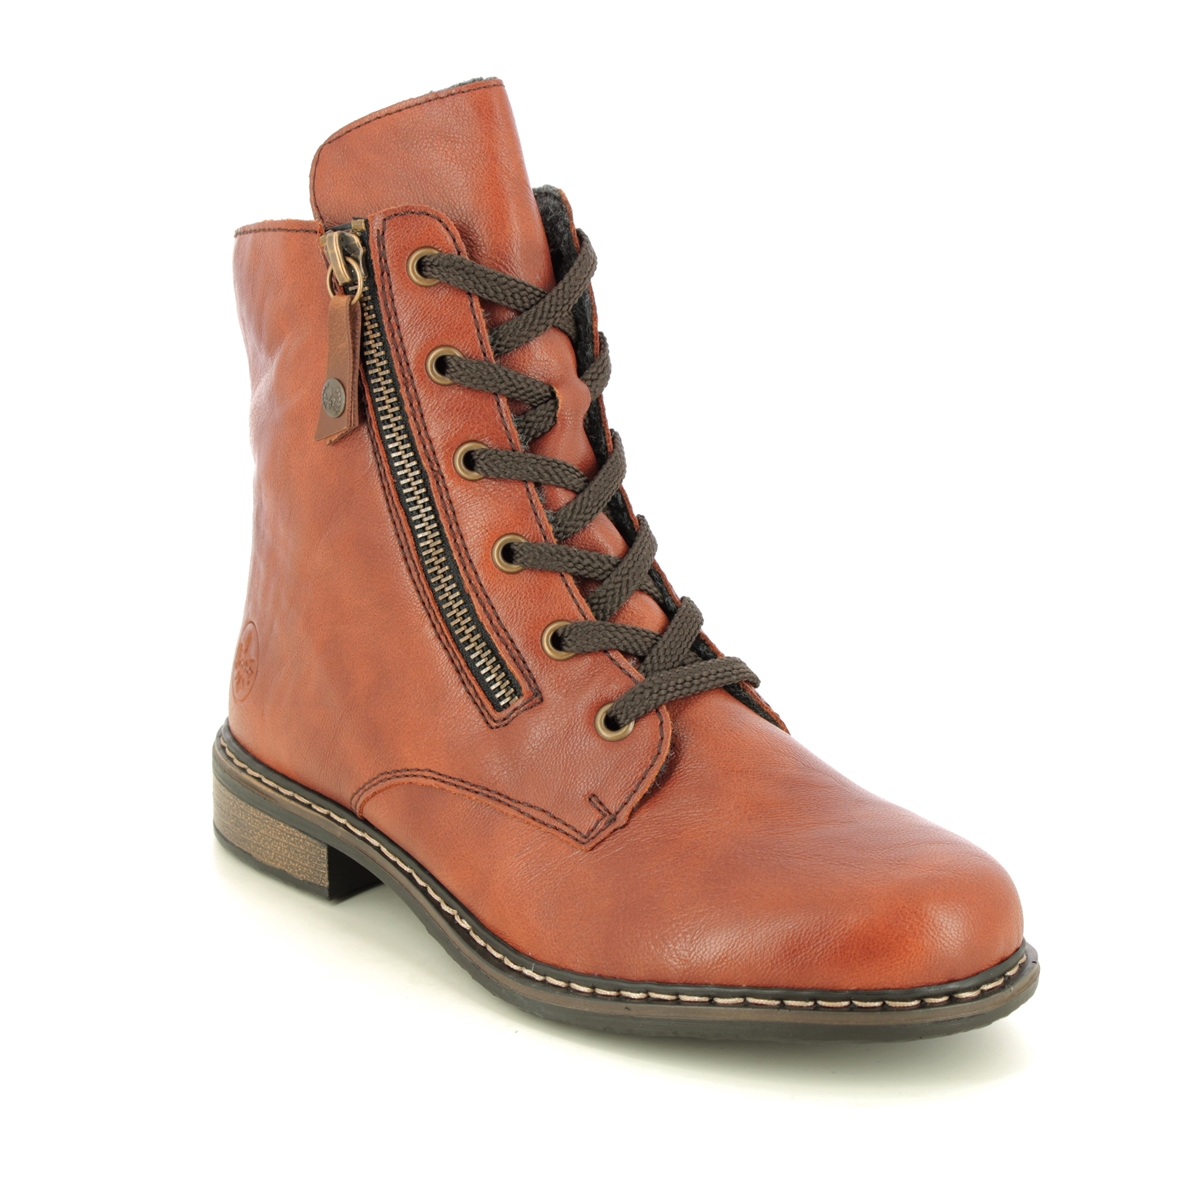 Rieker 71204-22 Tan Womens Lace Up Boots in a Plain Man-made in Size 38